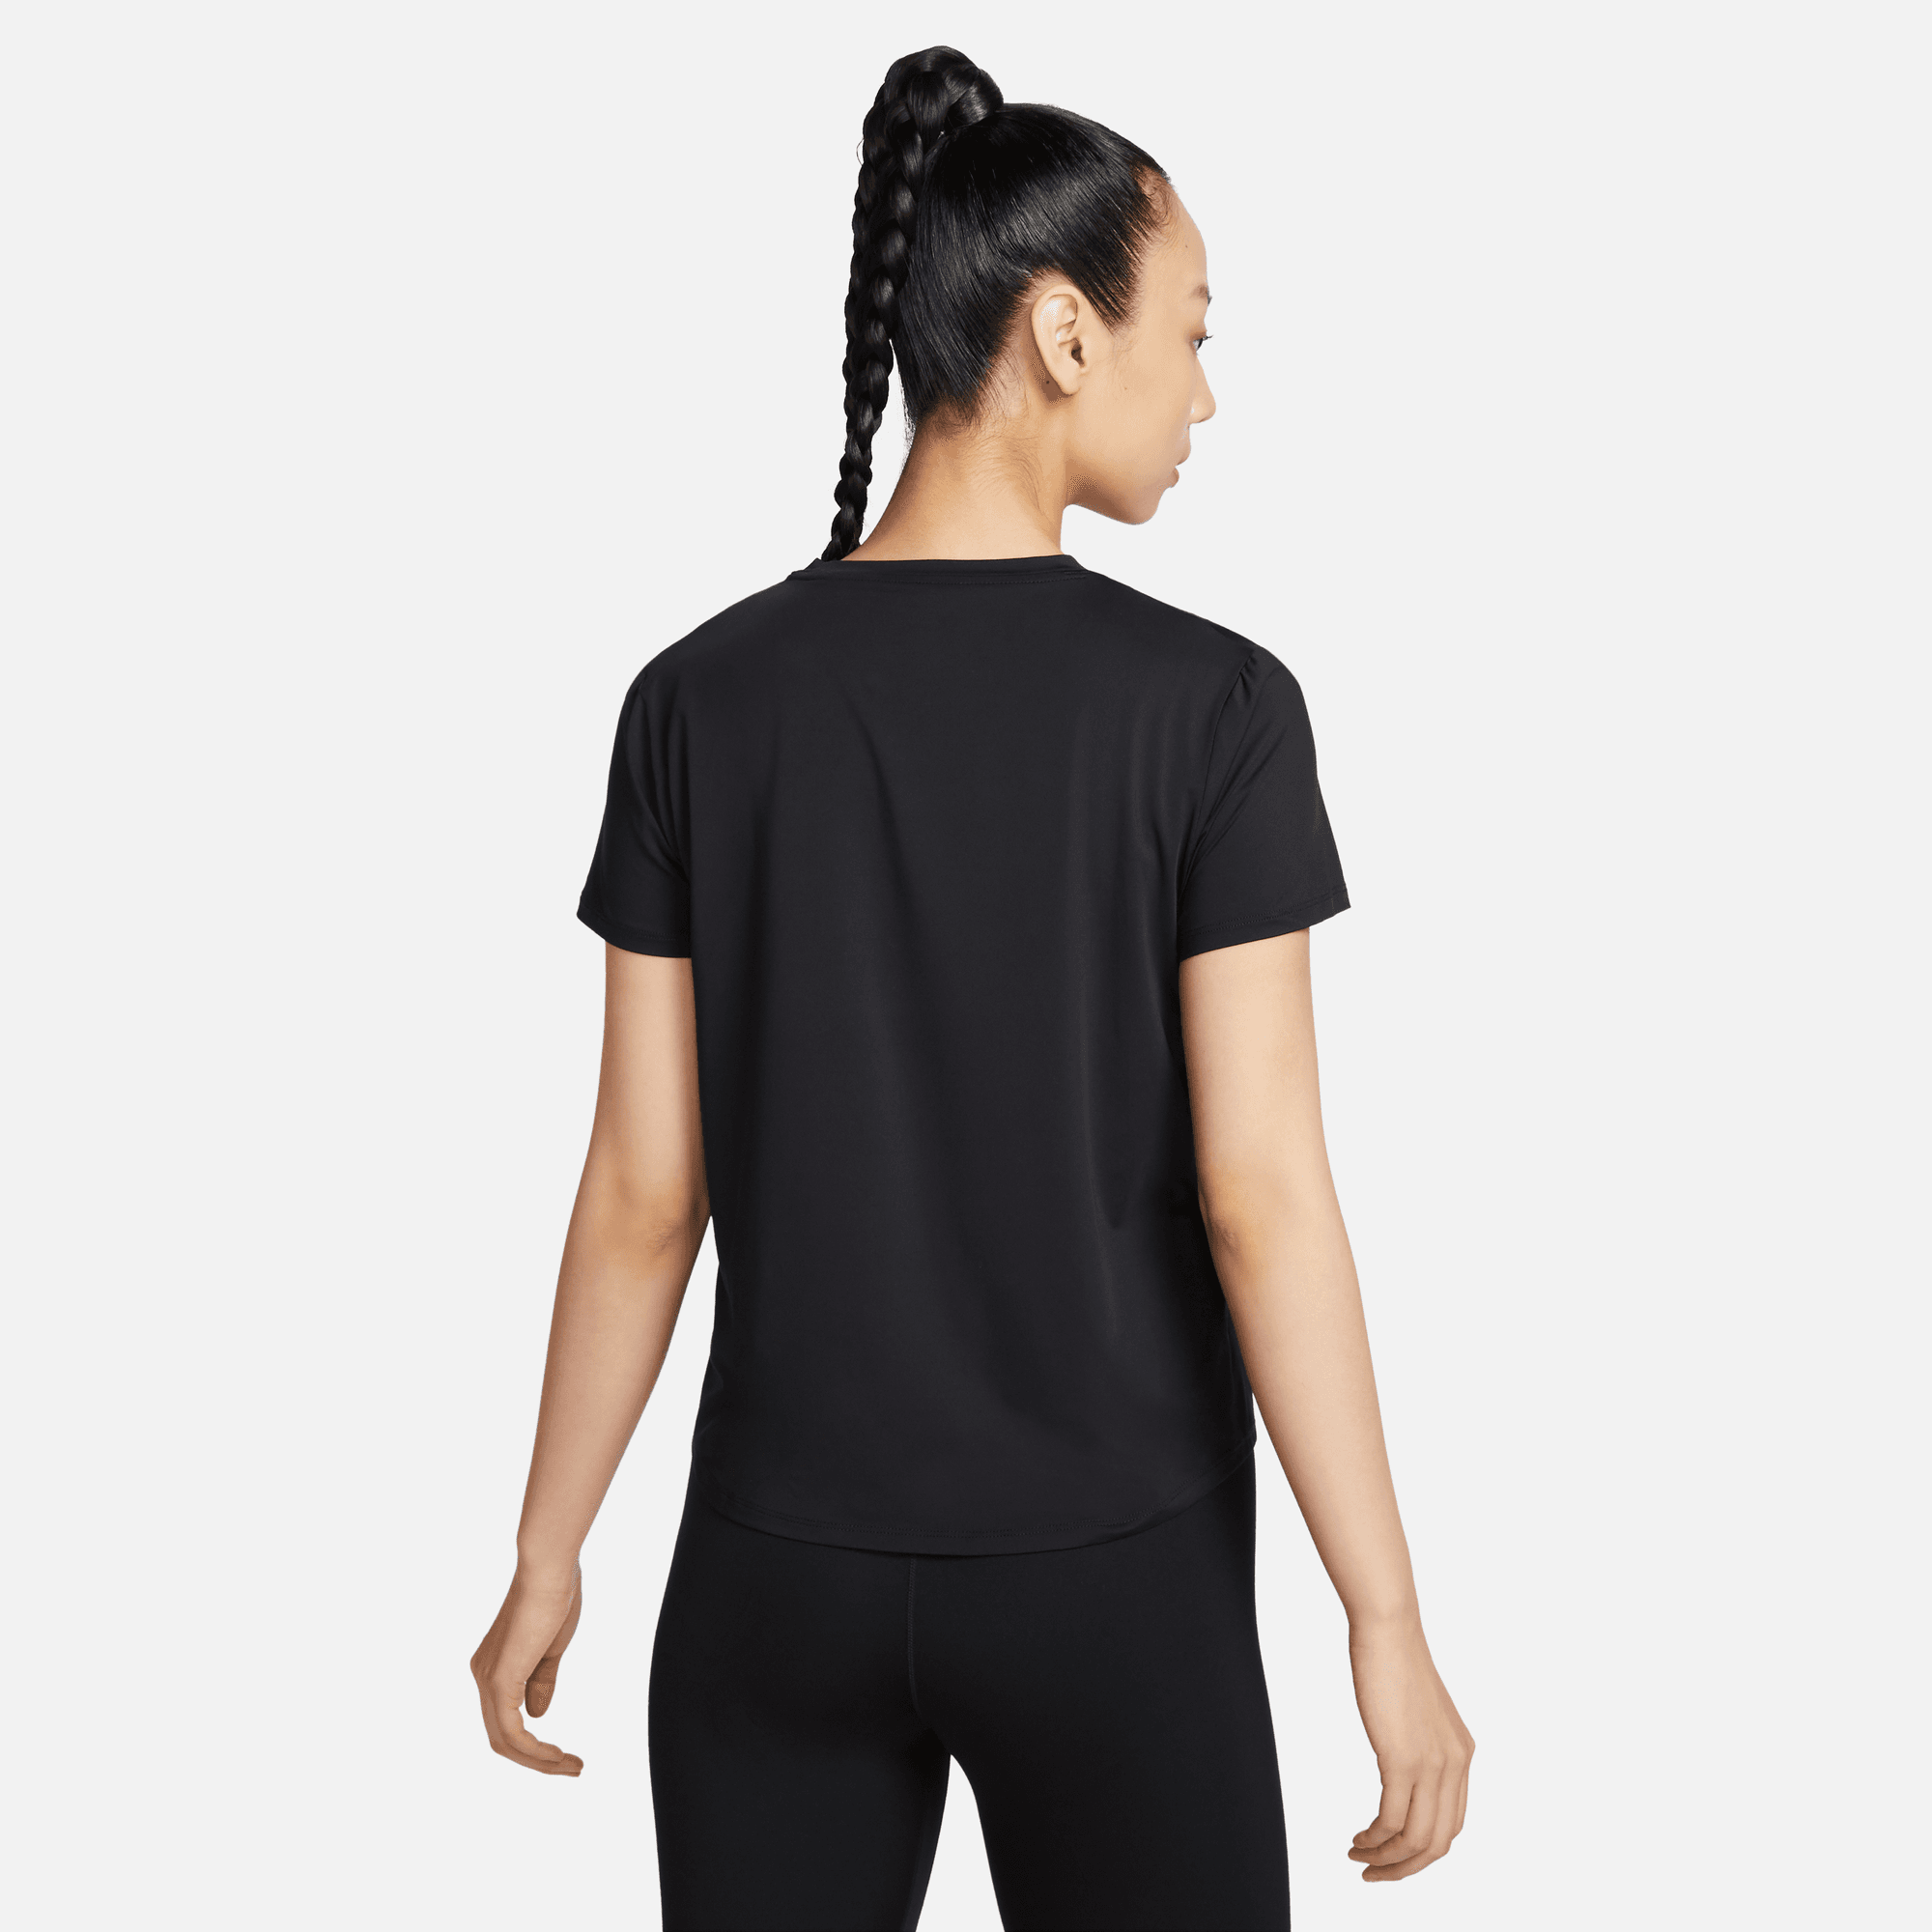 Nike One Relaxed Women's Dri-FIT Short-Sleeve Top.